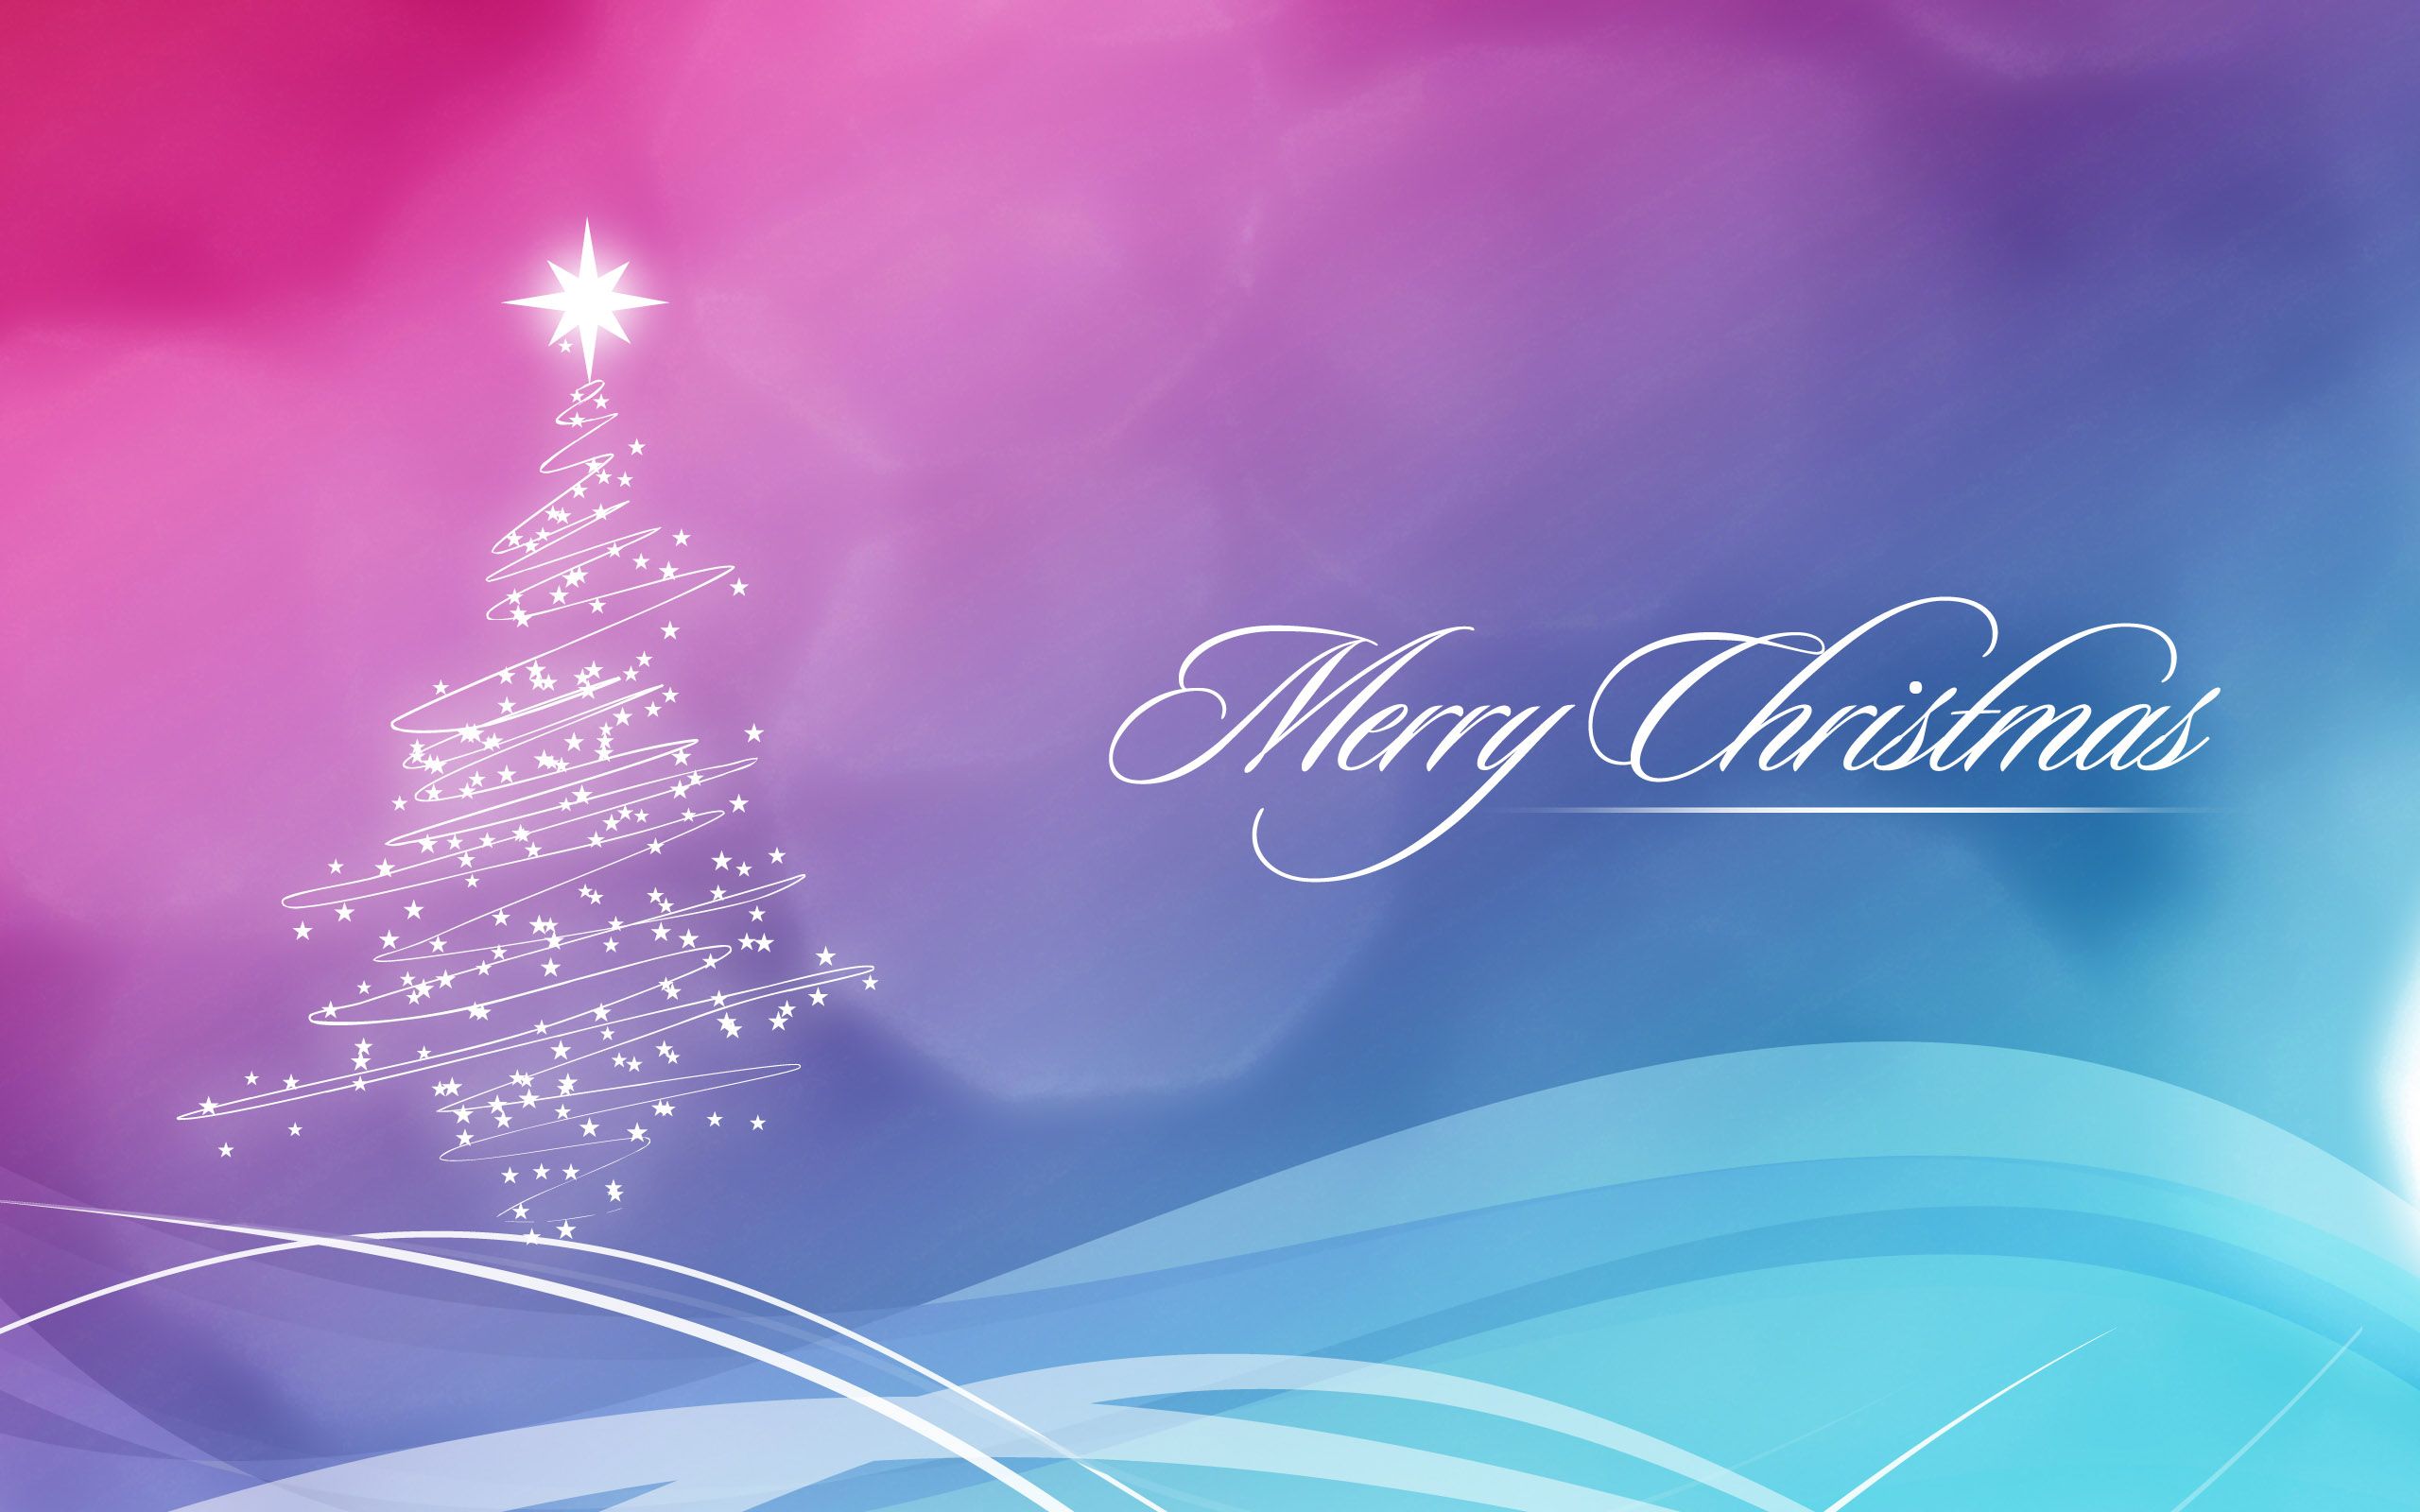 Merry Christmas Wallpapers HD 2015 free download Wallpapers